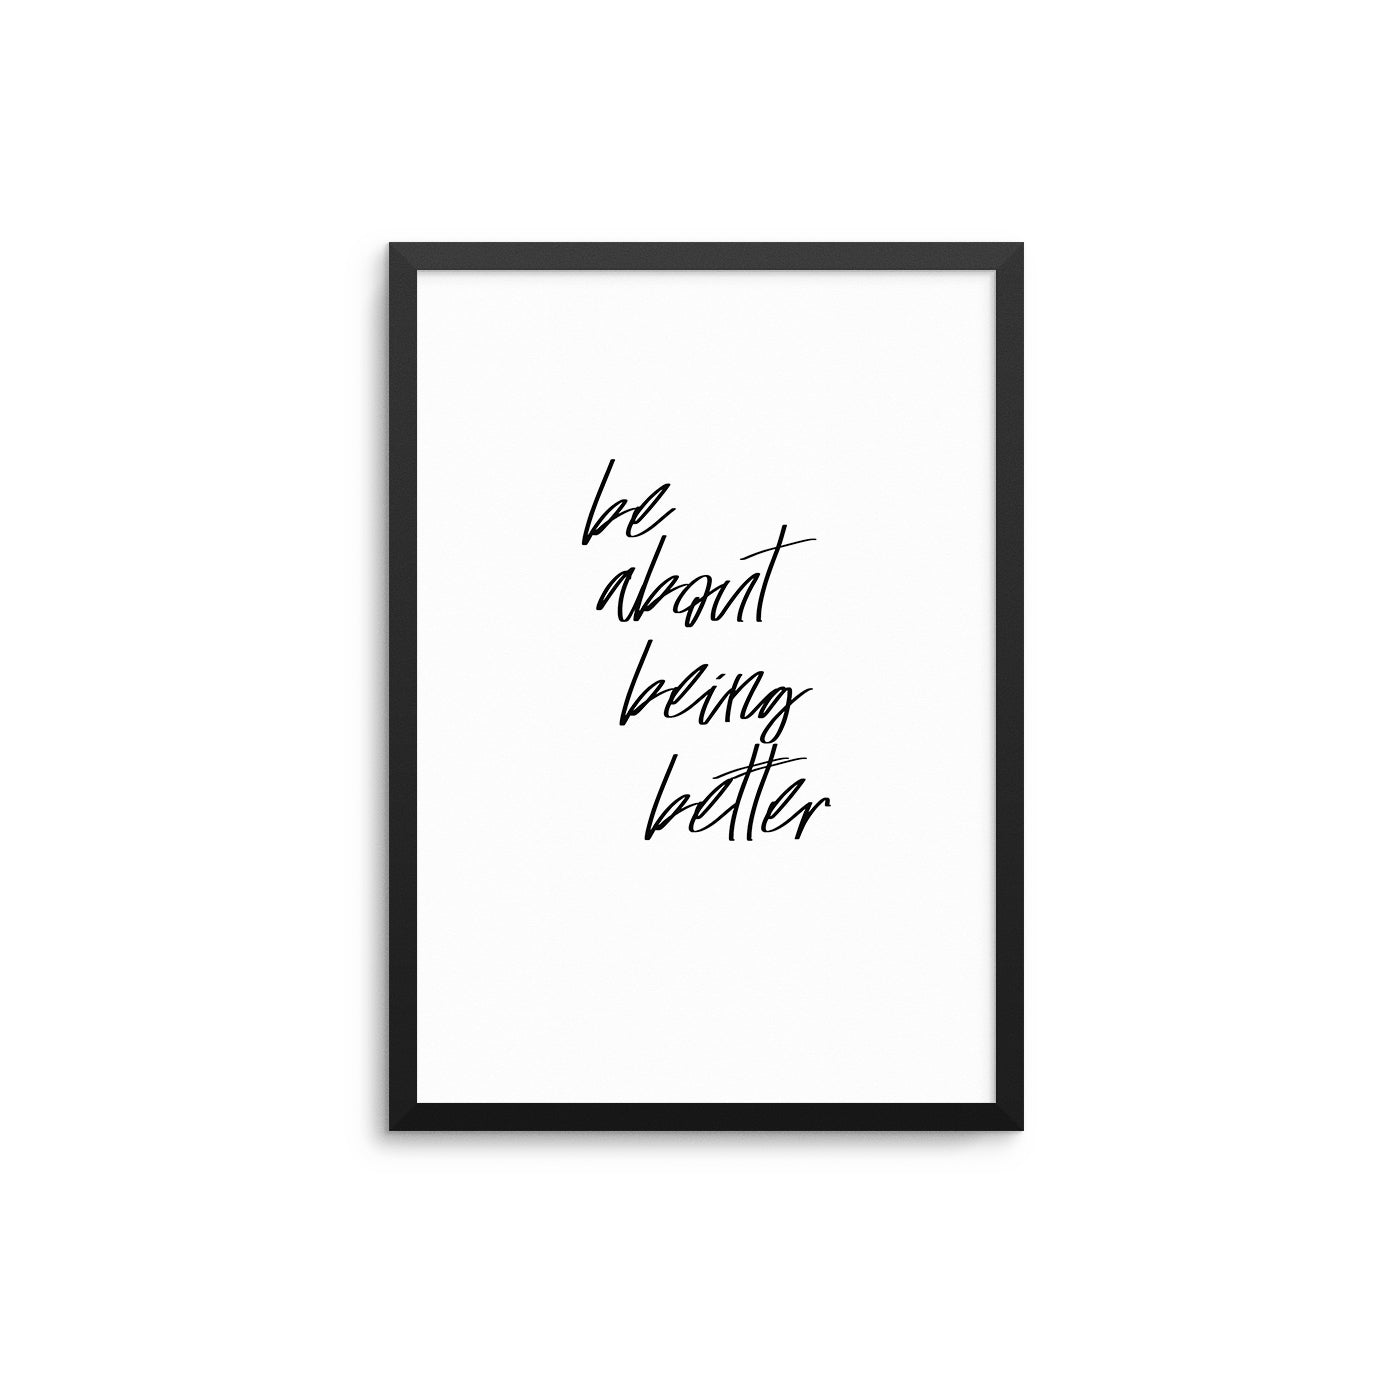 Be About Being Better - D'Luxe Prints